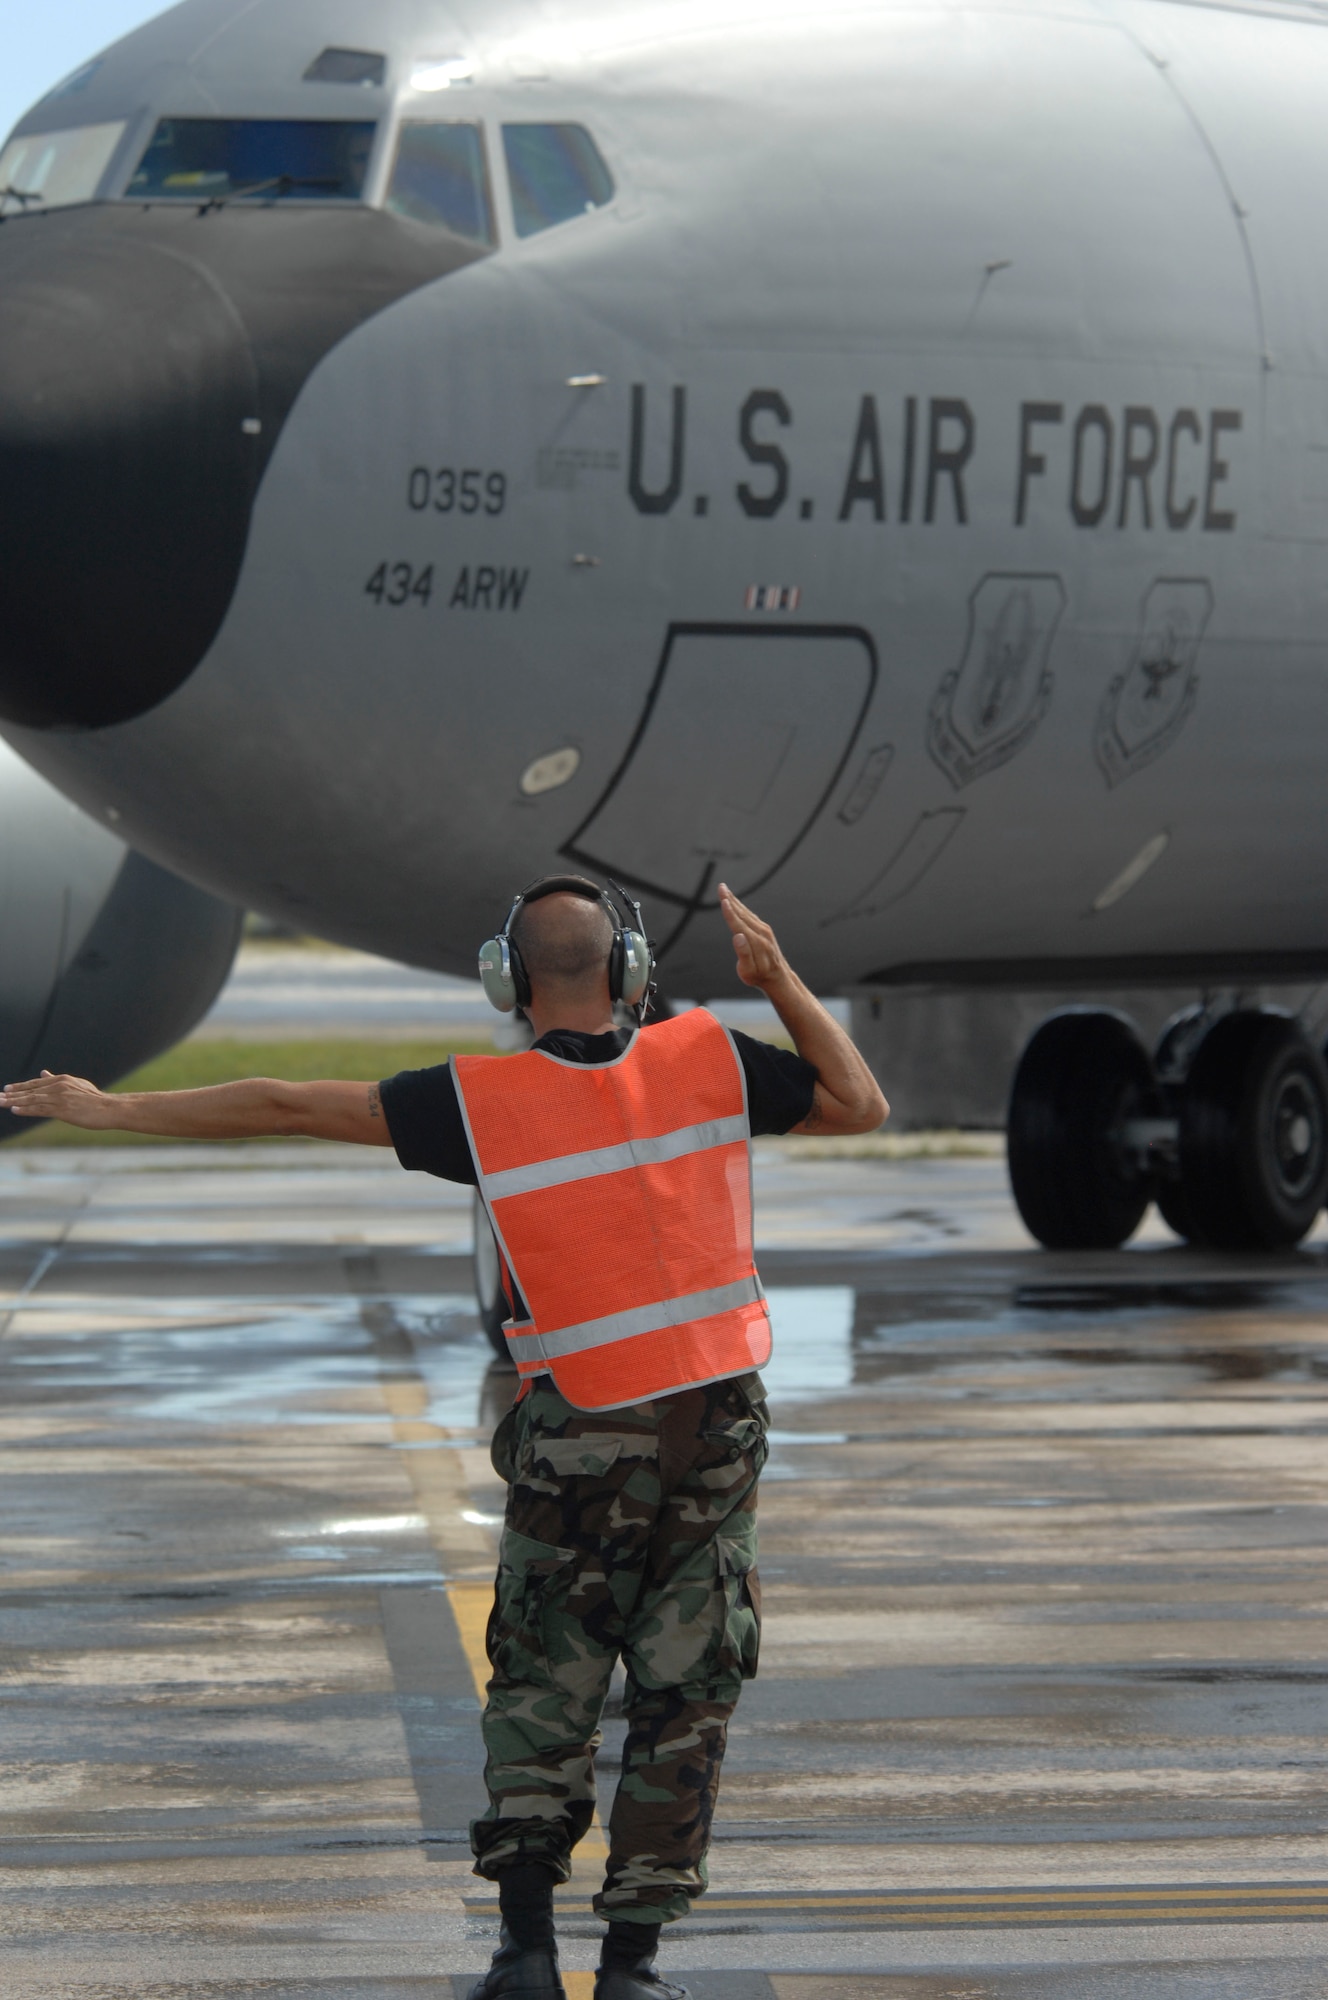 A crew chief from the 171st Air Refueling Wing Pennsylvania Air National Guard marshals in a KC-135R Stratotanker at Andersen Air Force Base, Guam Dec. 31. The 171st ARW deployment to Andersen was completed on Dec. 31 and the 434th ARW from Grissom Air Reserve Base, Ind., will now support the Pacific theater refueling operations. 

(U.S. Air Force photo/ Master Sgt. Kevin J. Gruenwald) released





















  












 











































  












 

























